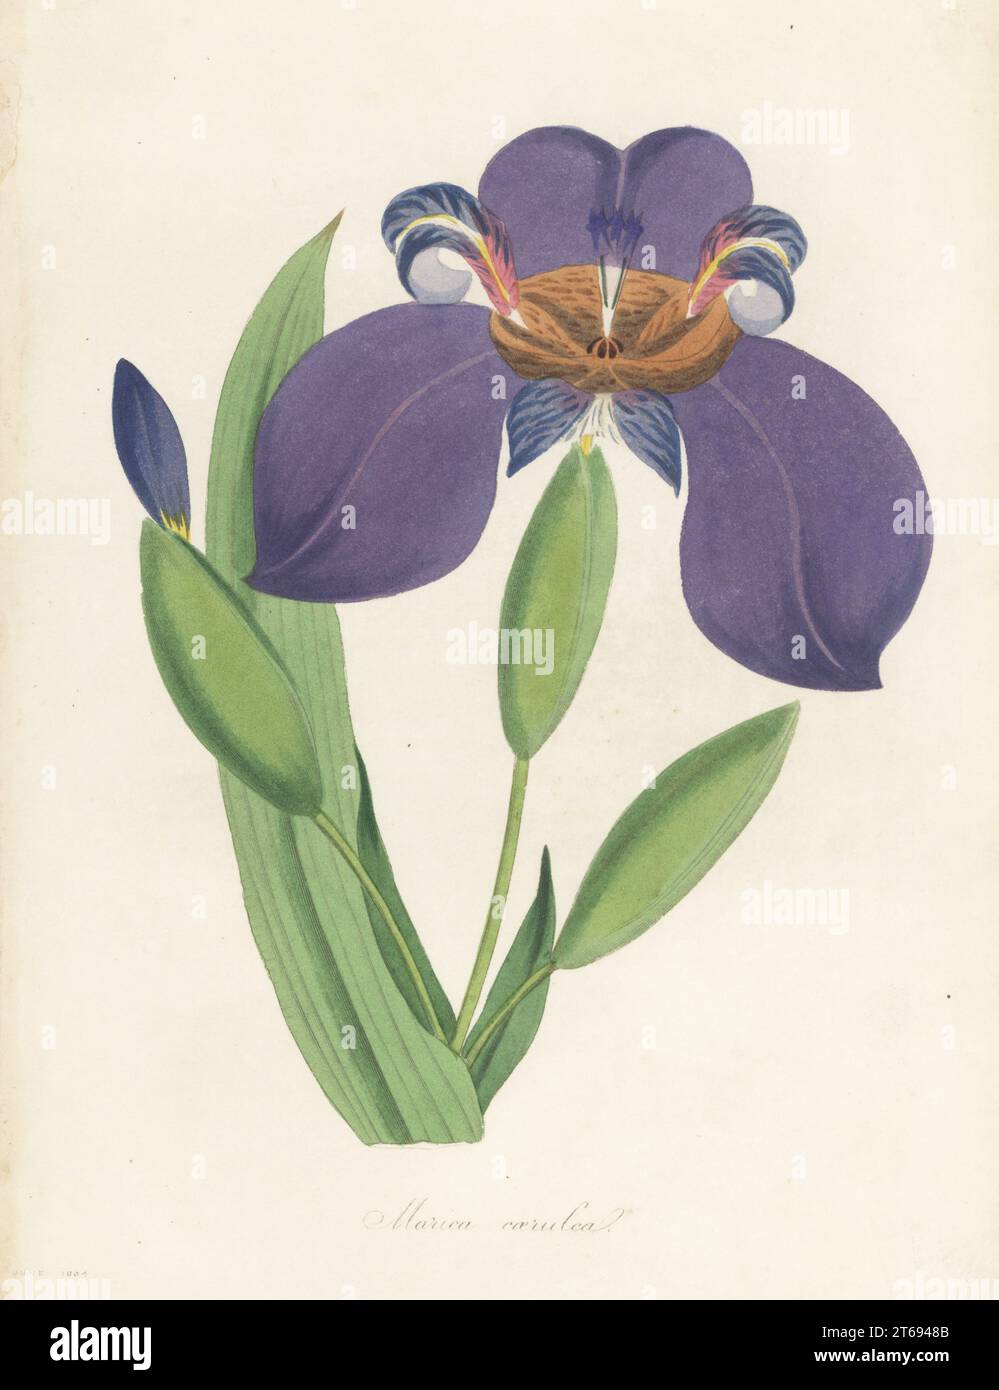 Walking iris, Trimezia coerulea. Native of Brazil, introduced in 1818. Blue marica, Marica caerulea. Handcoloured engraving from Joseph Paxtons Magazine of Botany, and Register of Flowering Plants, Volume 1, Orr and Smith, London, 1834. Stock Photo